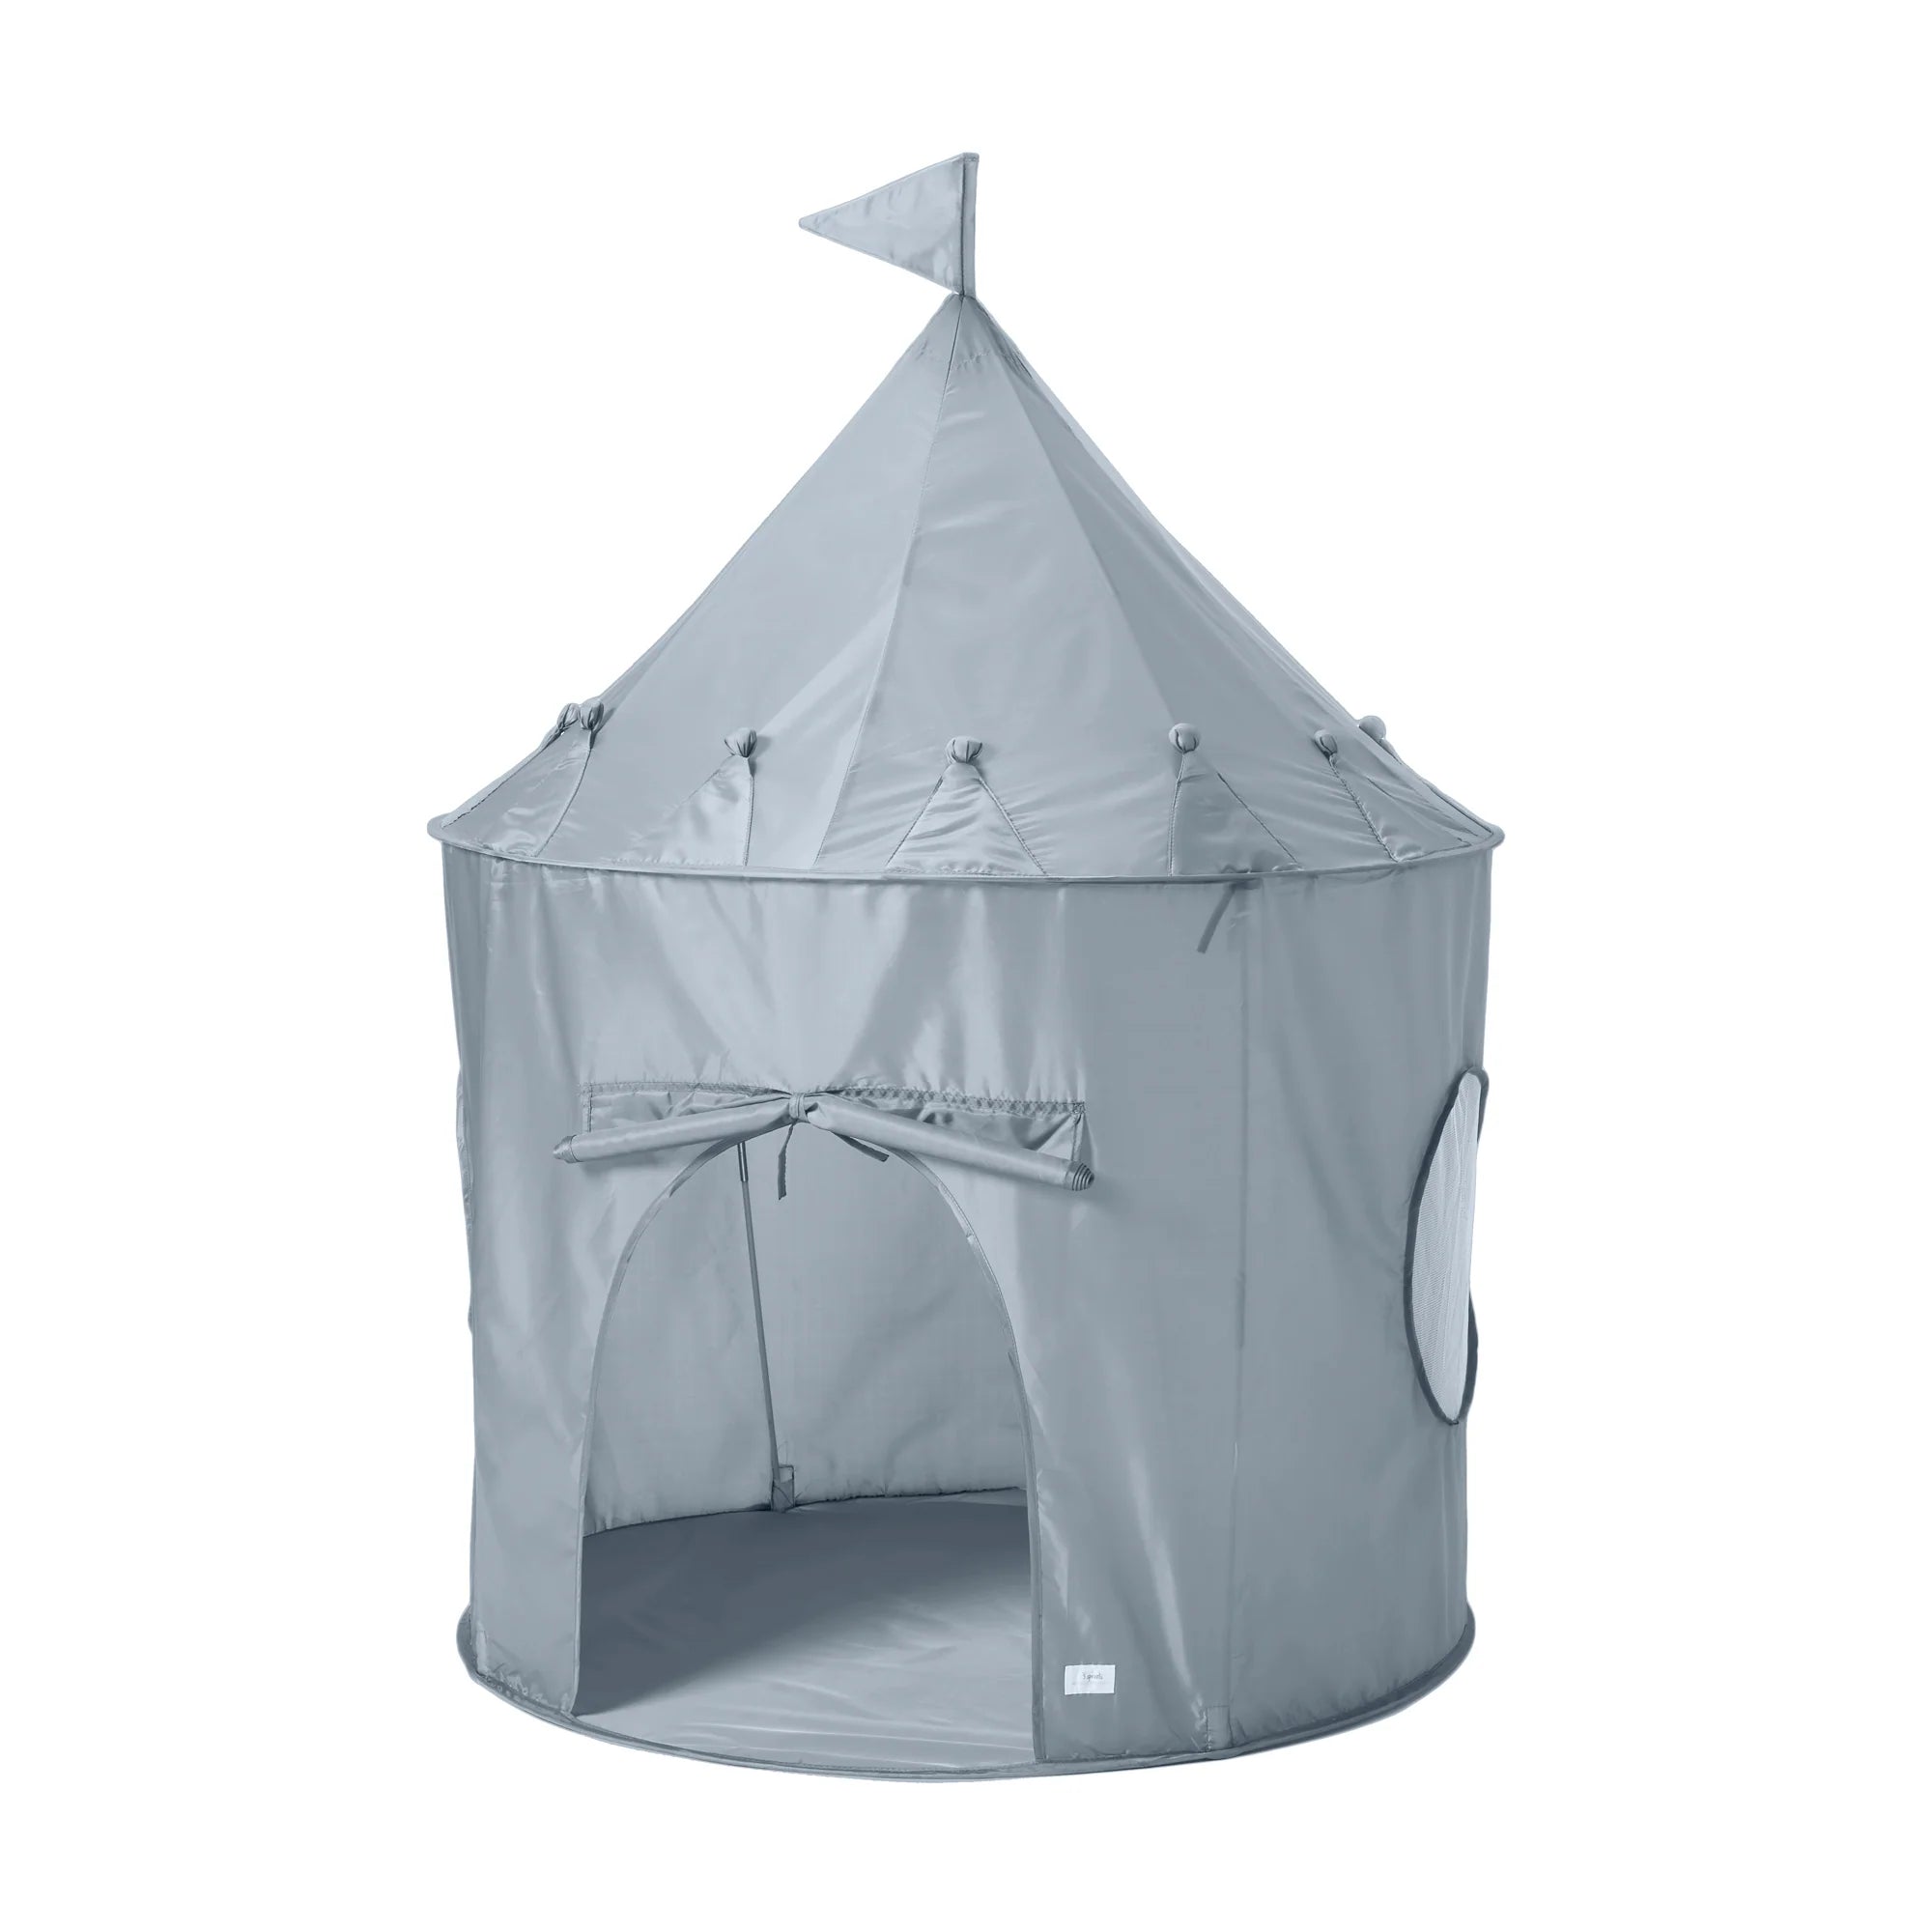 RECYCLED FABRIC PLAY TENT BLUE